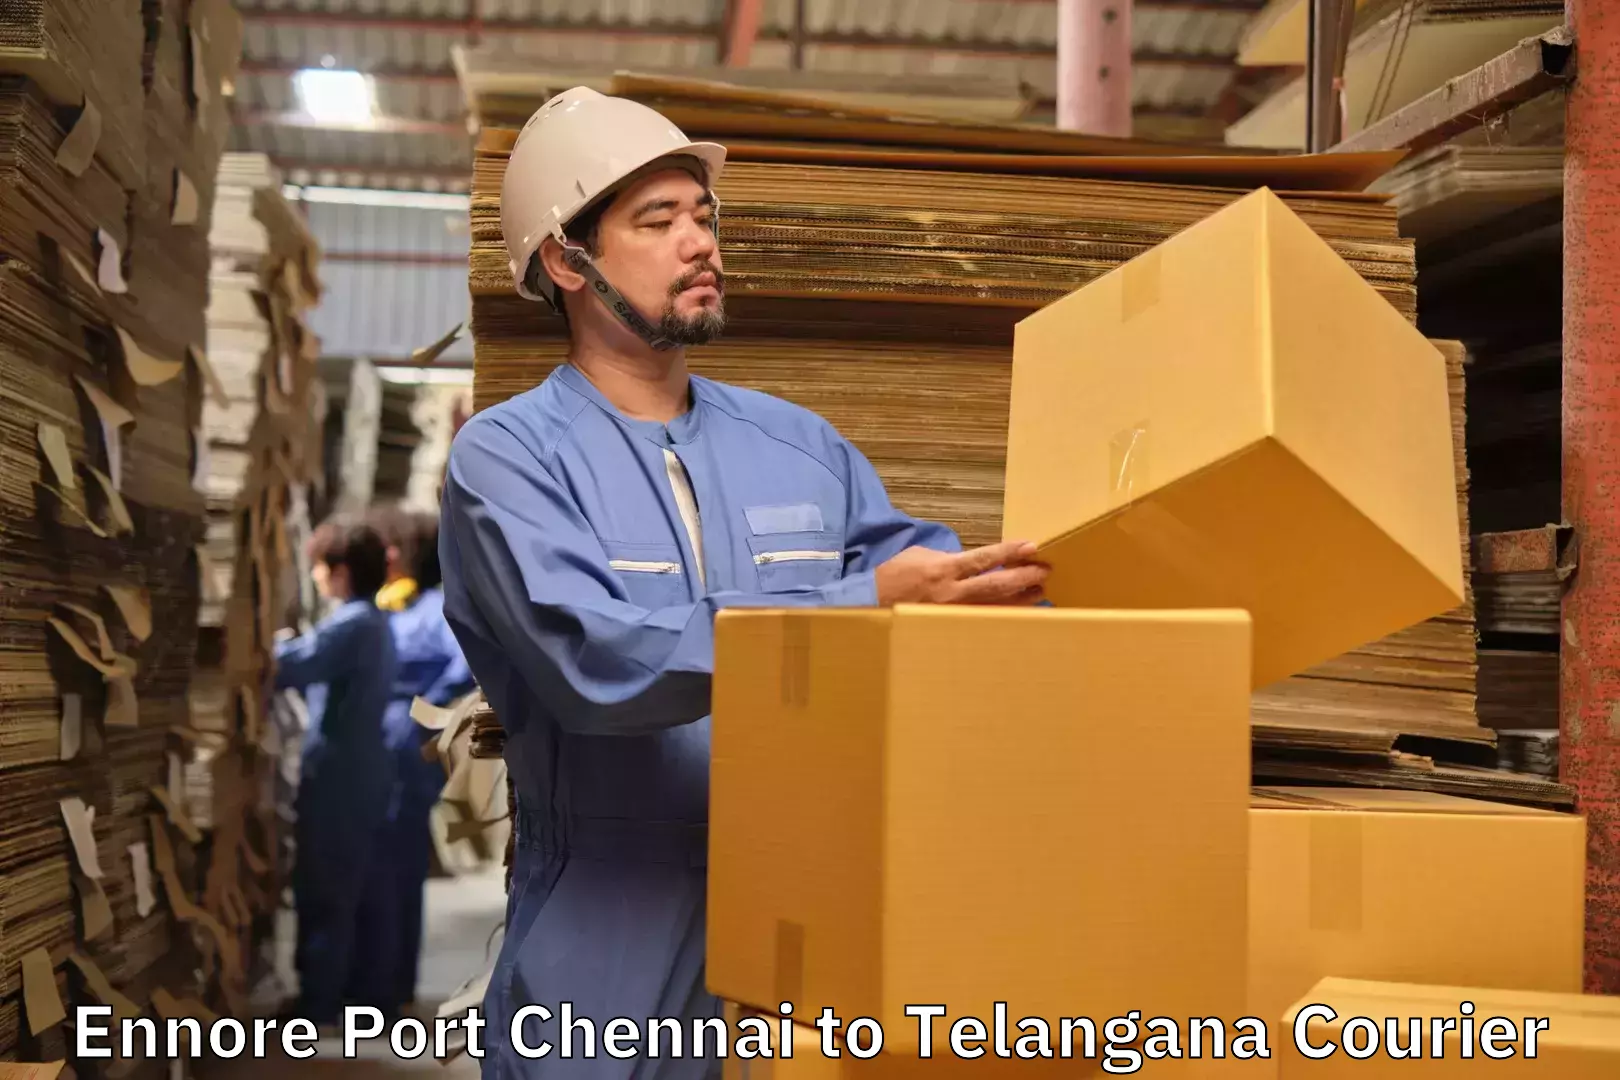 Baggage shipping service Ennore Port Chennai to Sultanabad